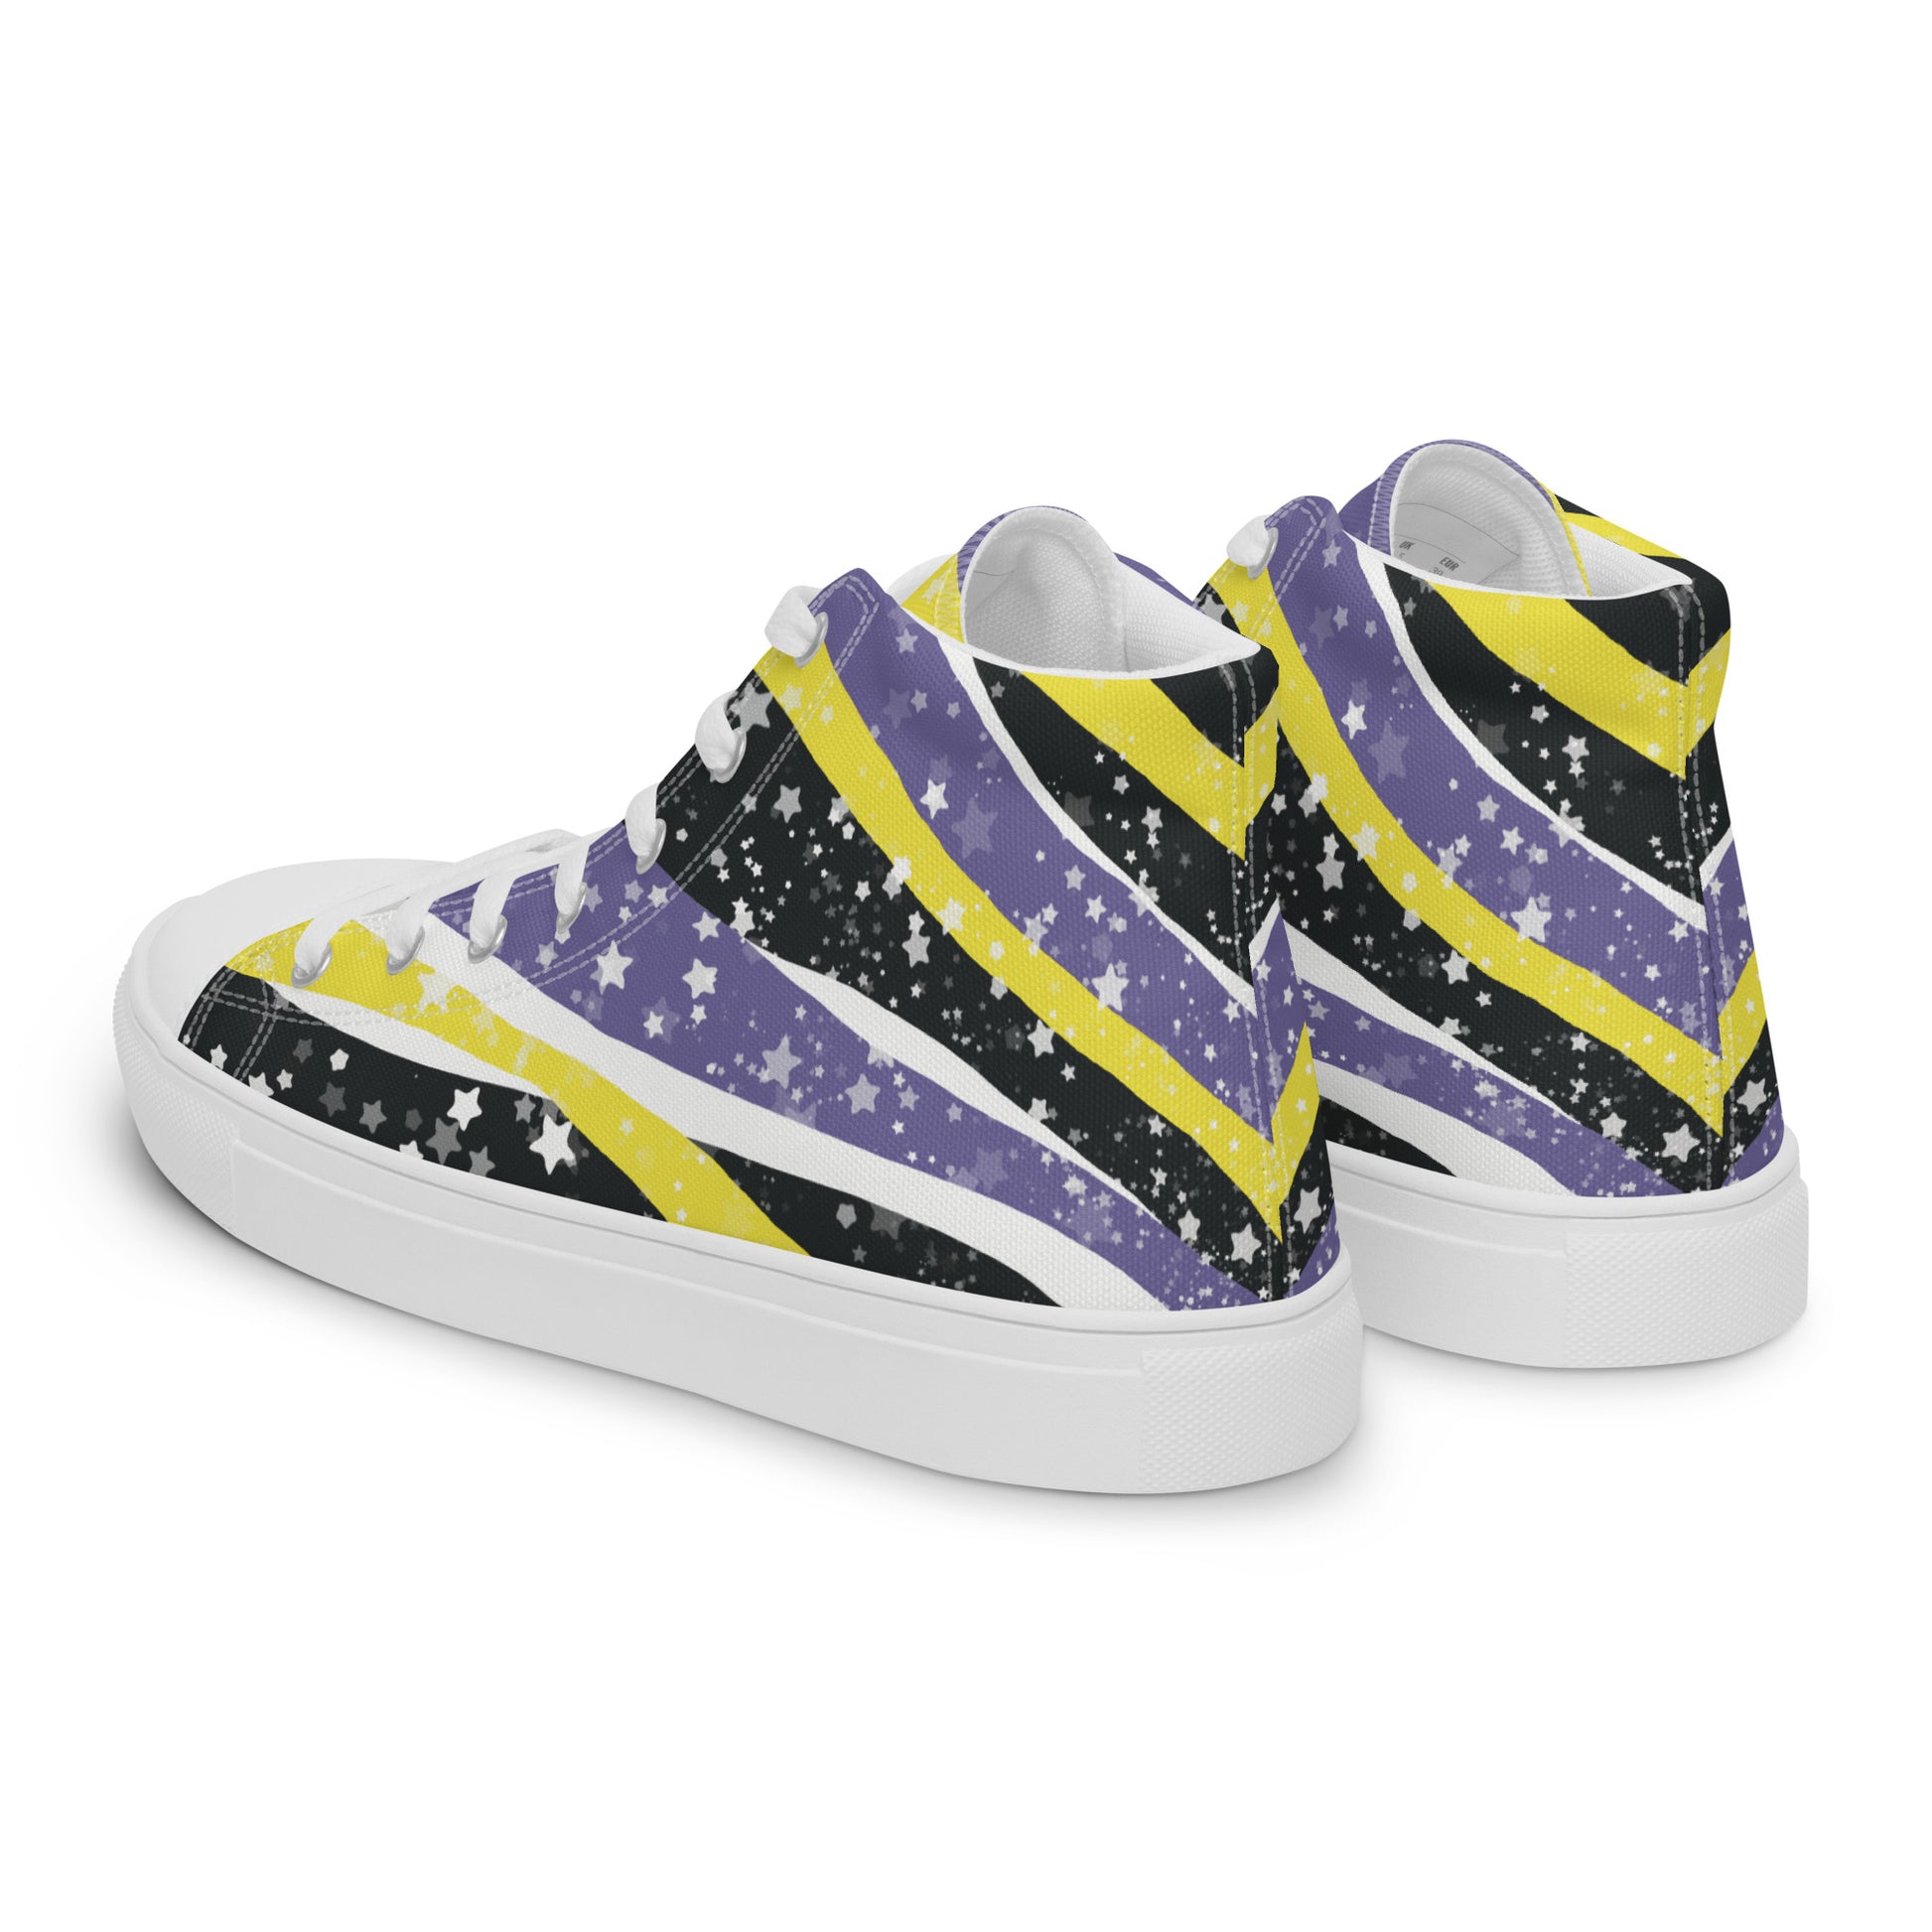 Left back view: a pair of high-top shoes with ribbons of the yellow, purple, and black of the non-binary pride flag coming from the heel and expanding towards the laces with an explosion of stars over it, white accents, and the Aras Sivad Studio logo in black on the tongue.